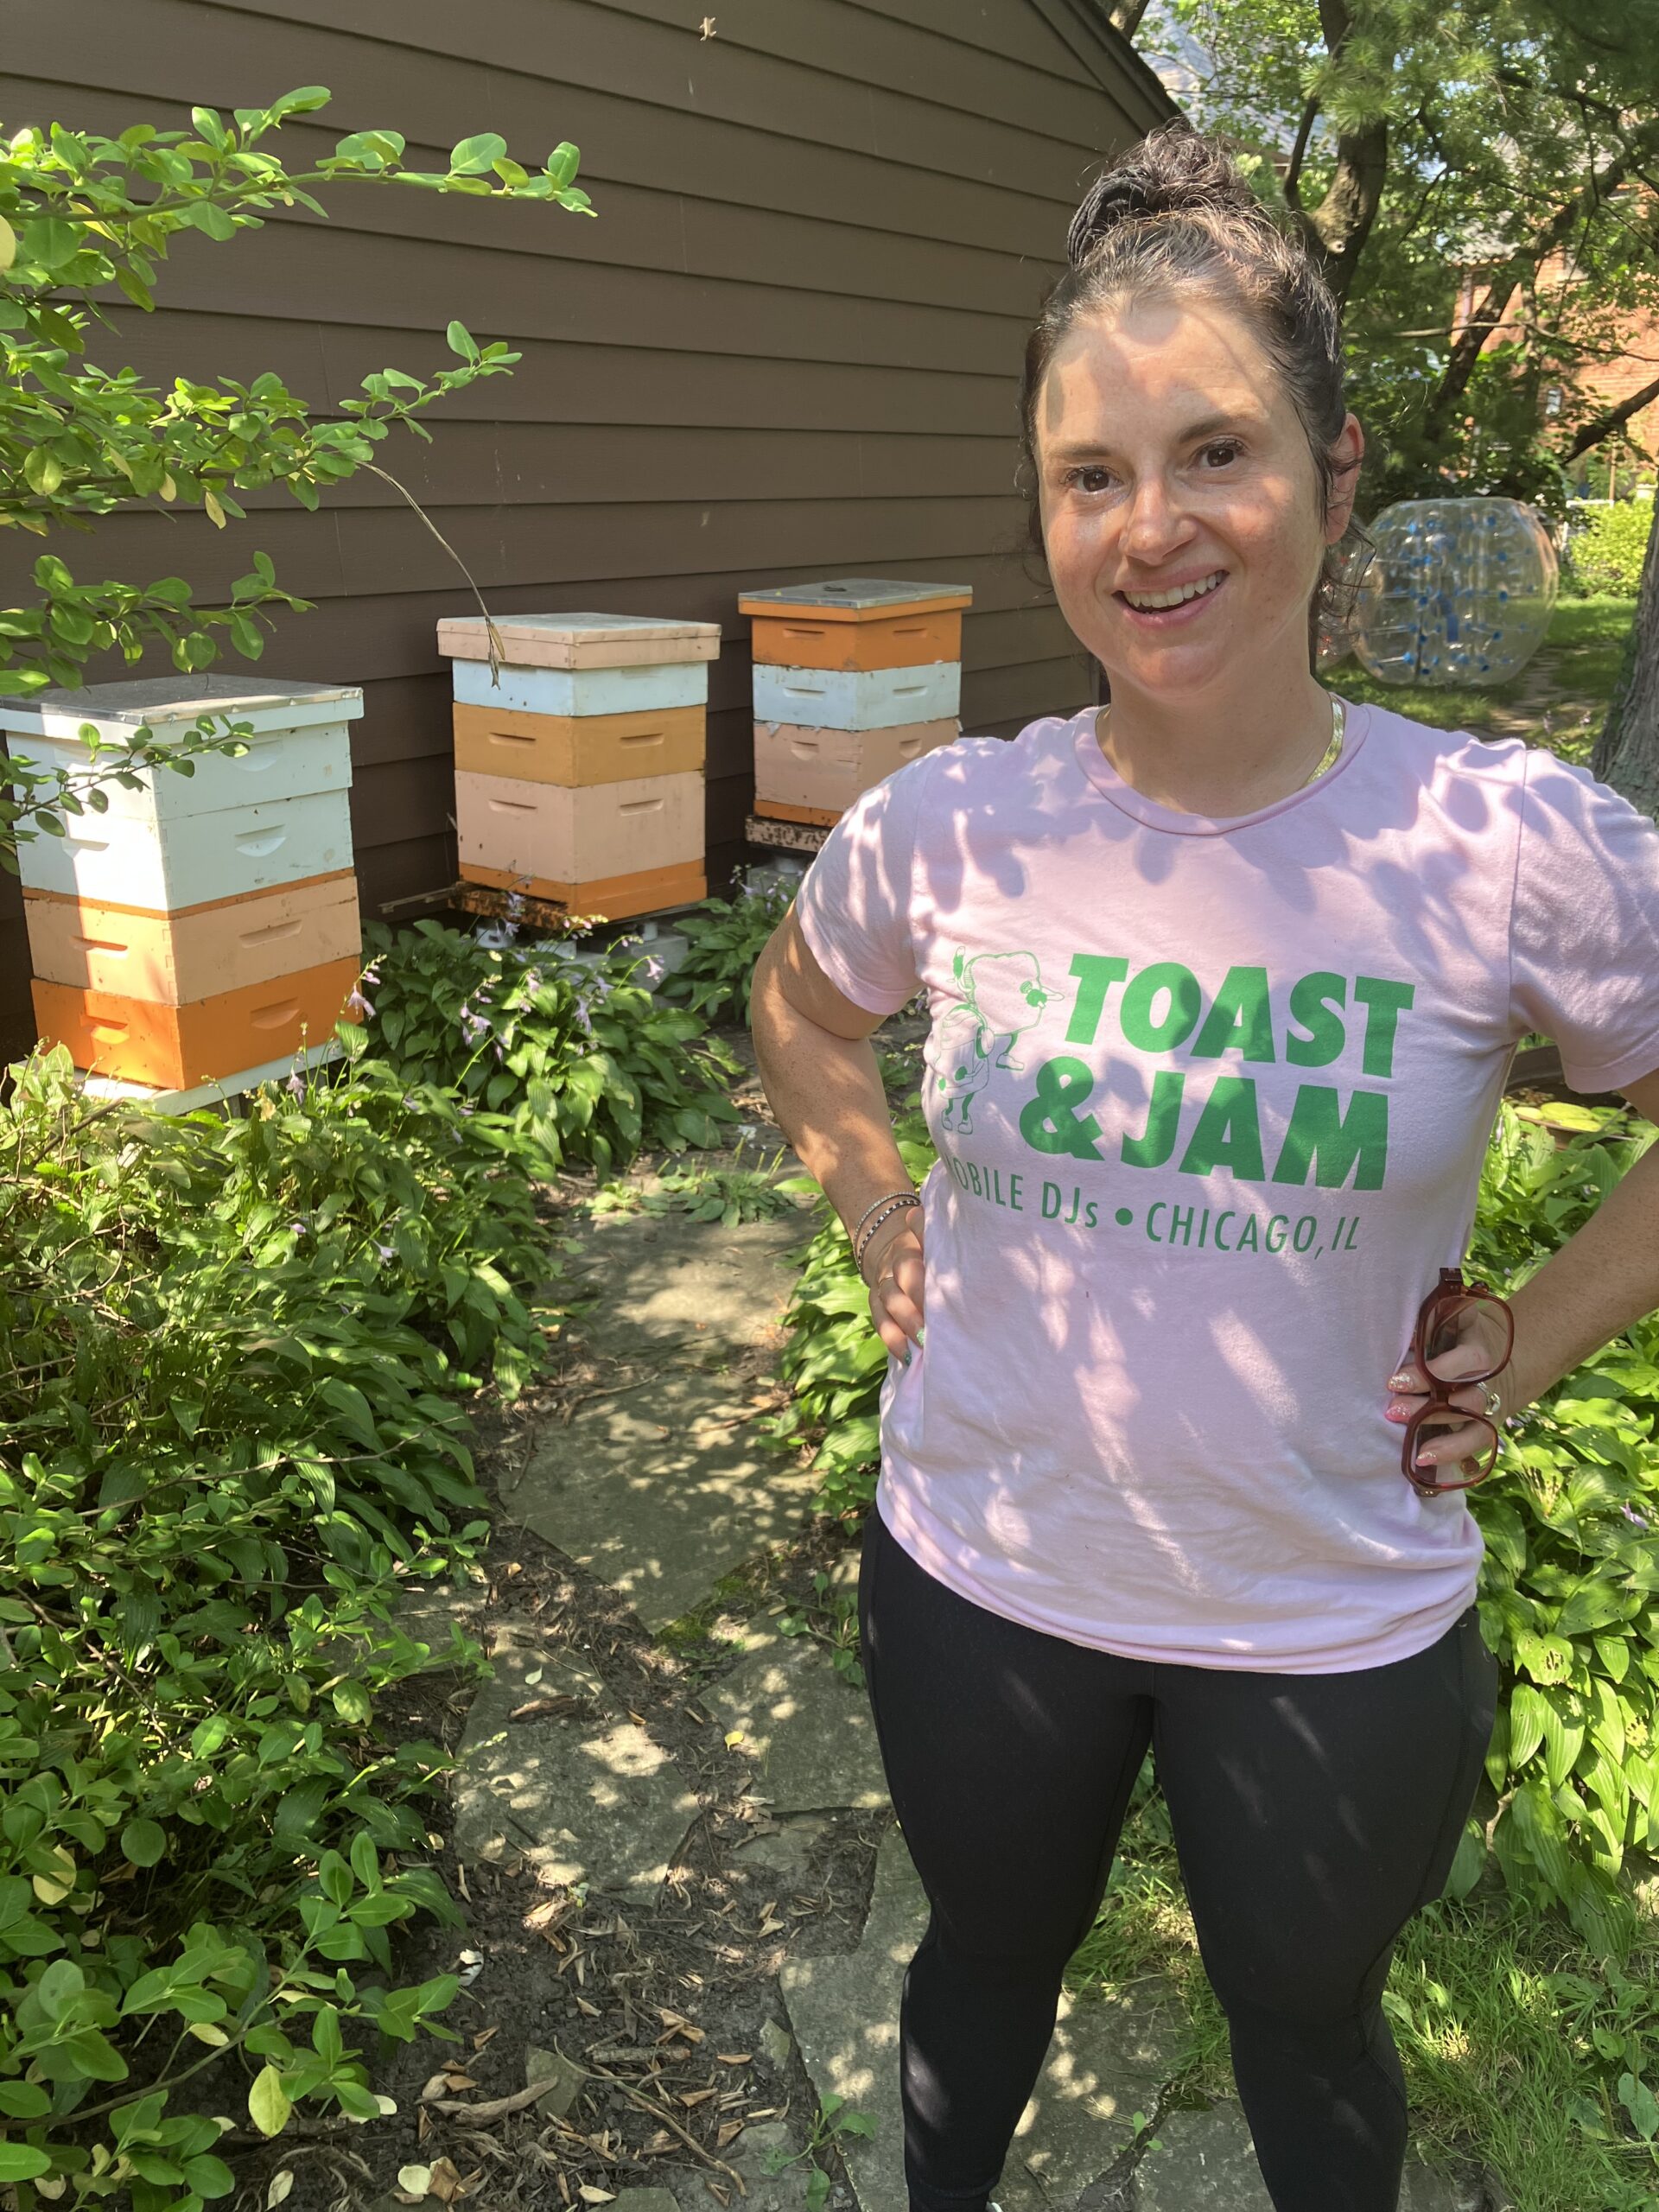 A neighbor’s bees are bugging an Evanston resident, so city seeks insect expert opinion